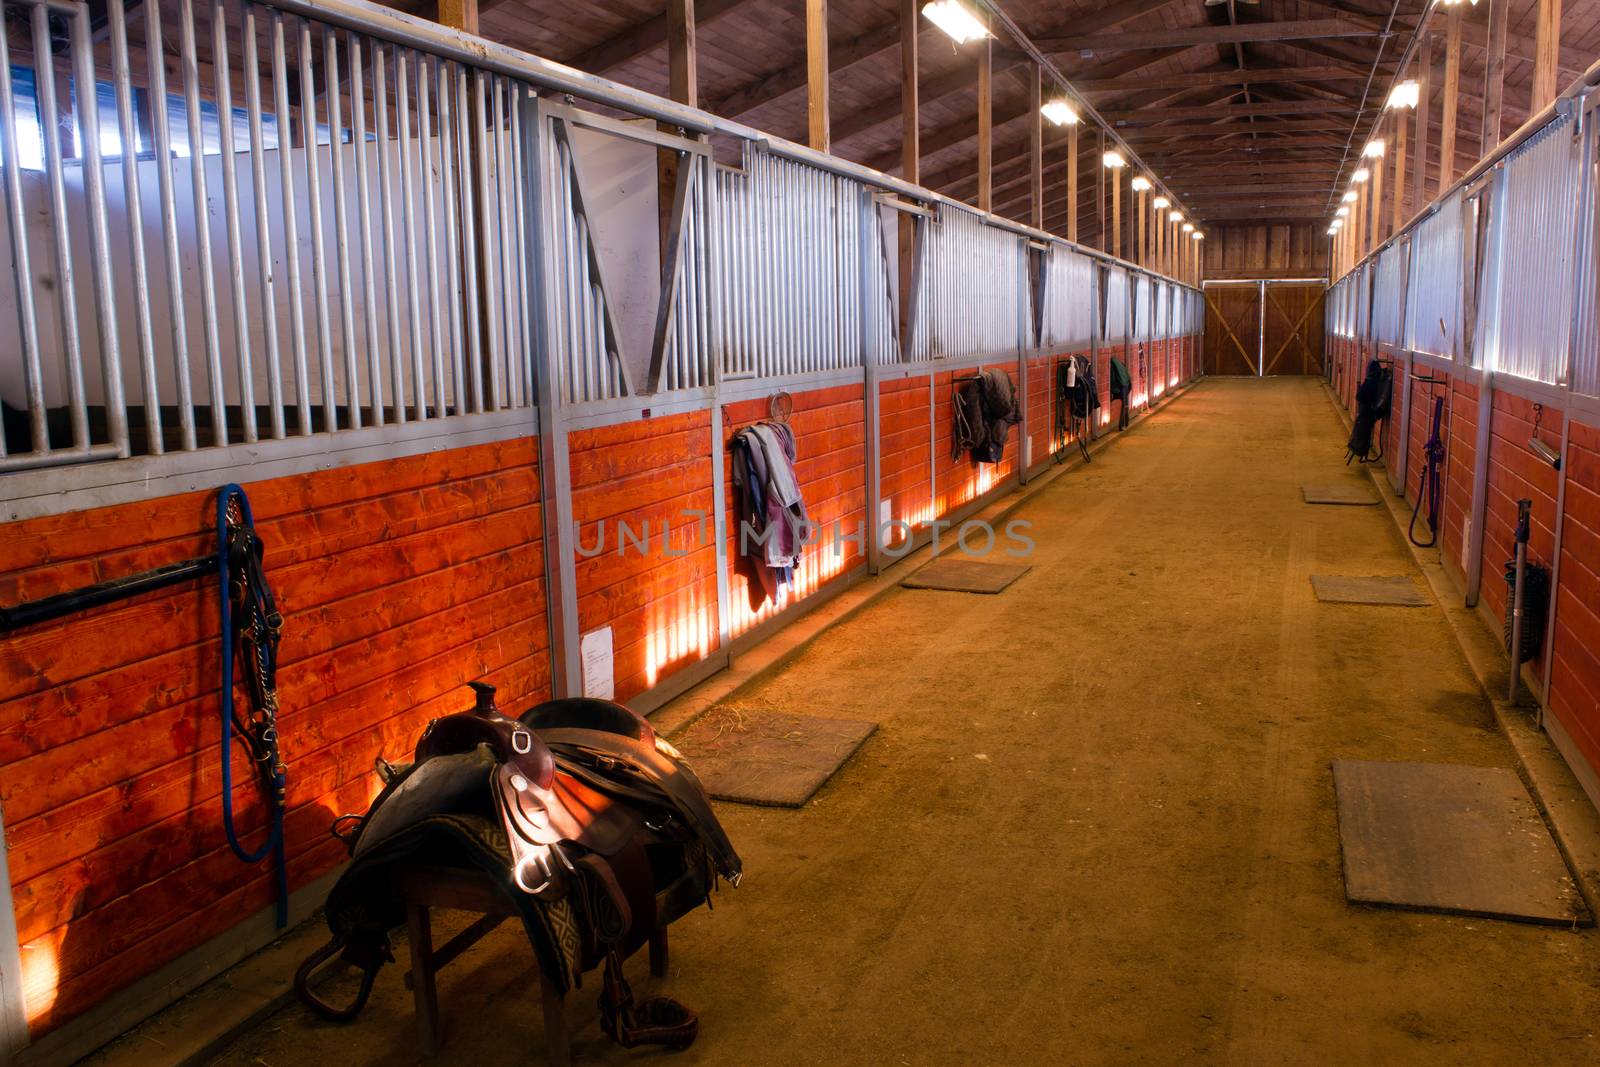 Saddle Center Path Horse Paddack Equestrian Stable by ChrisBoswell